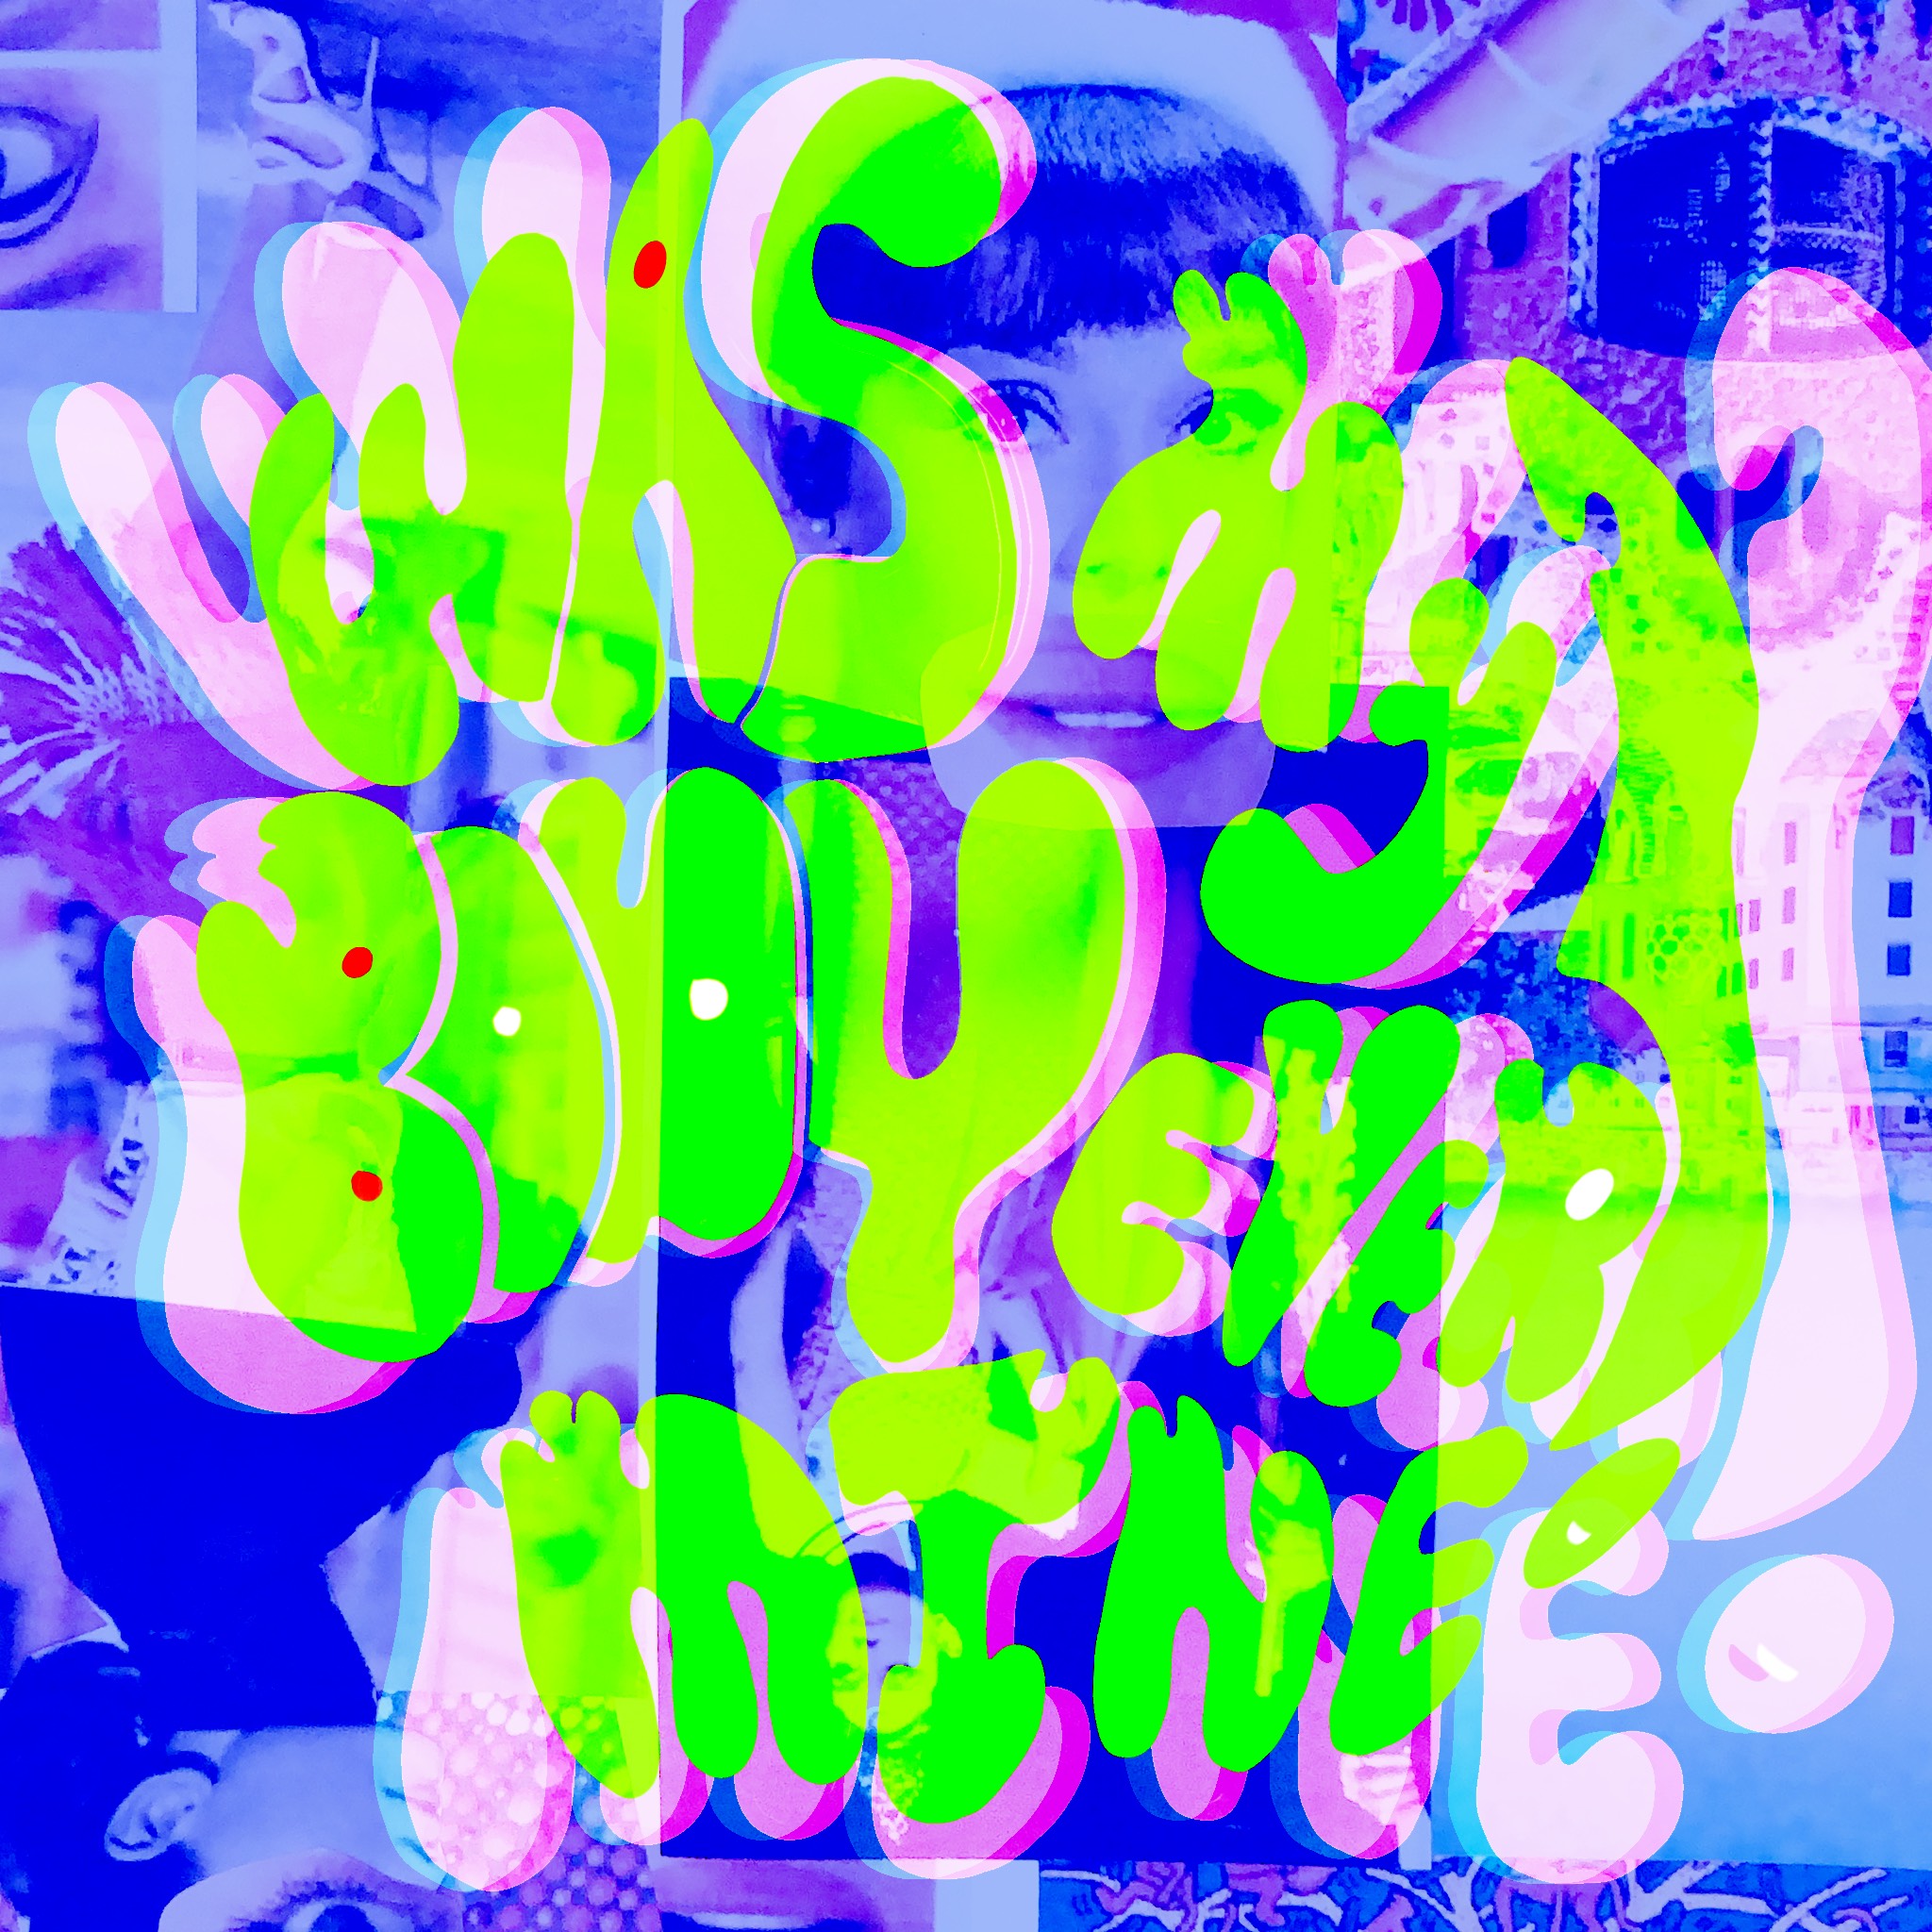 green and pink wavy text over blue background saying was my body ever mine